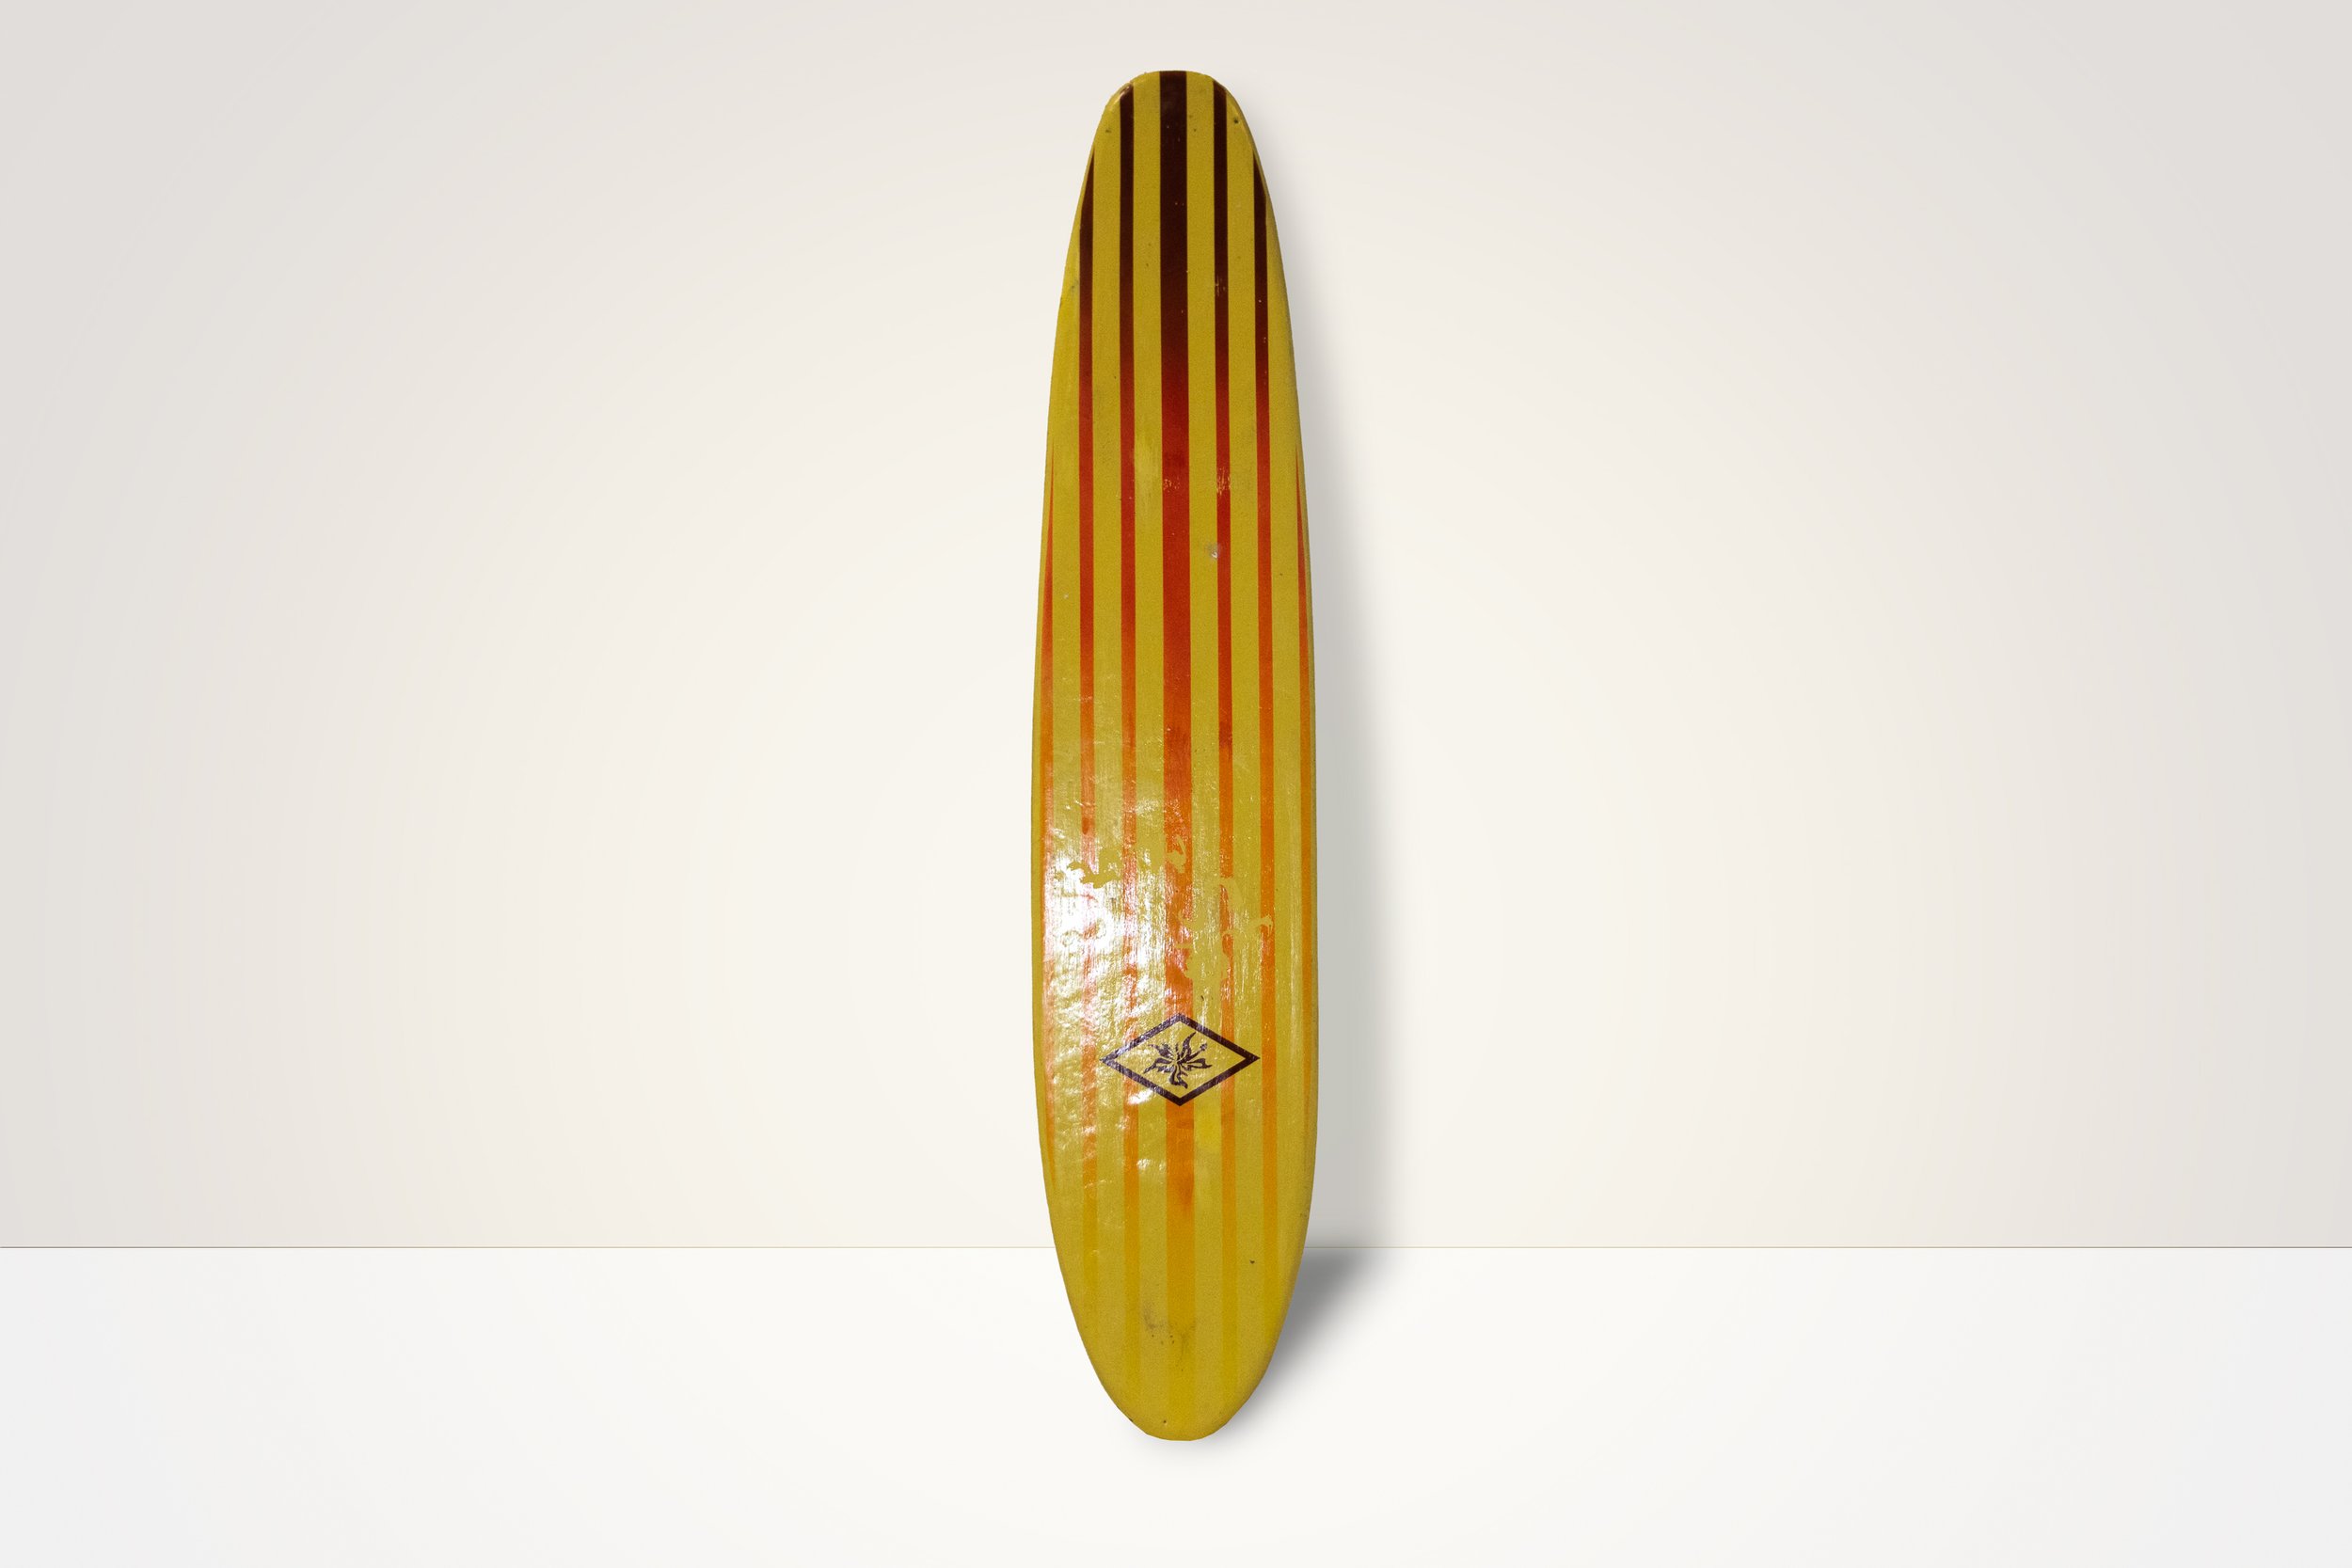 The 3D Surfboards